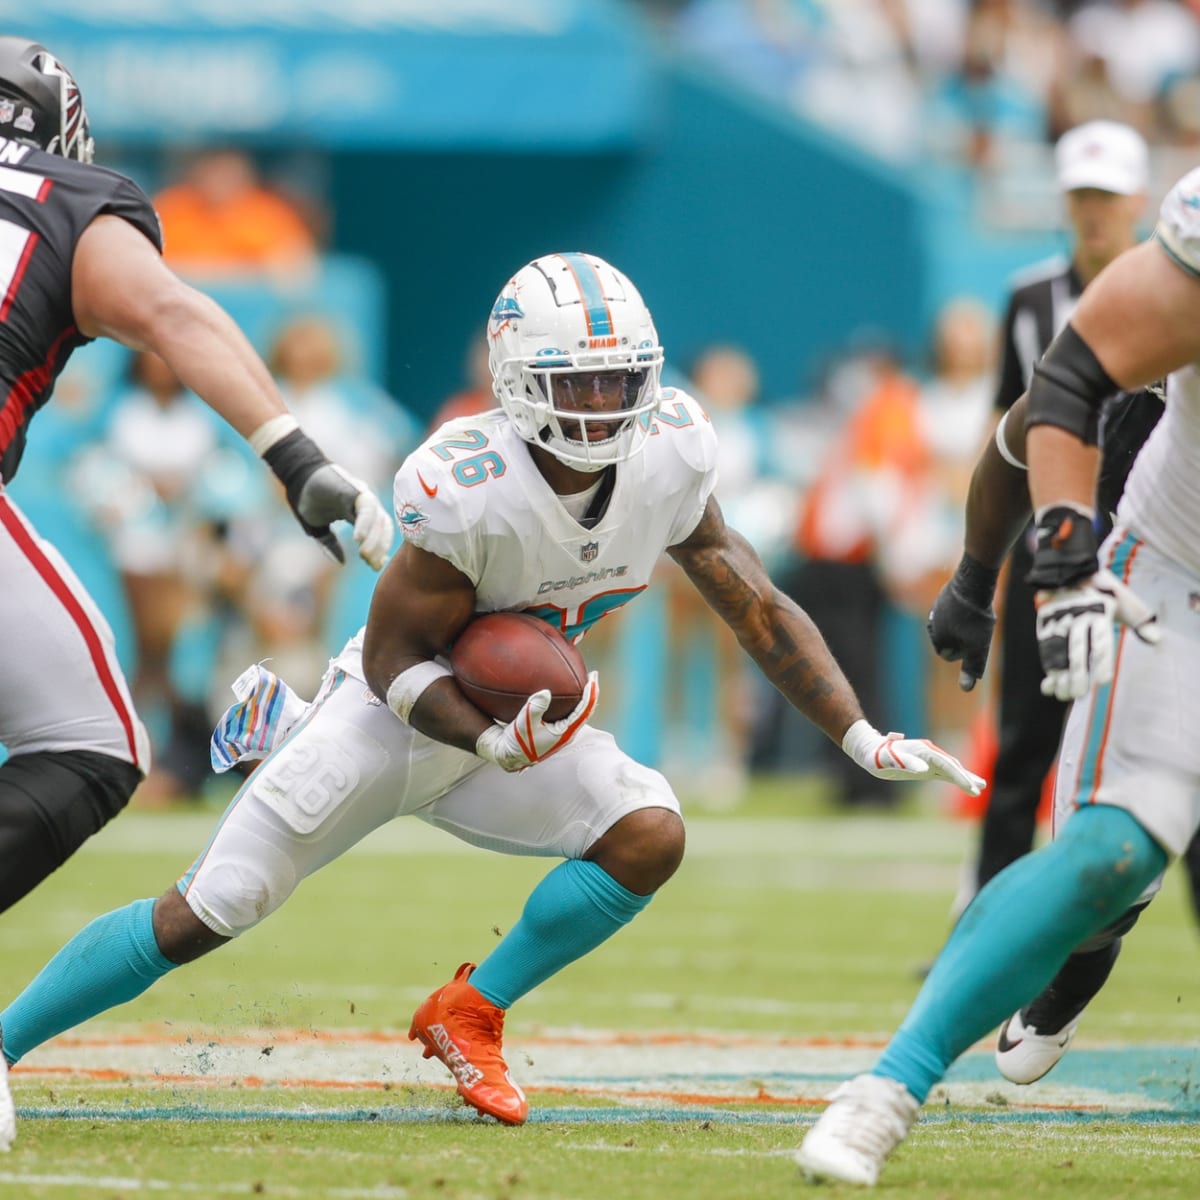 Running back Salvon Ahmed of the Miami Dolphins runs against the Las